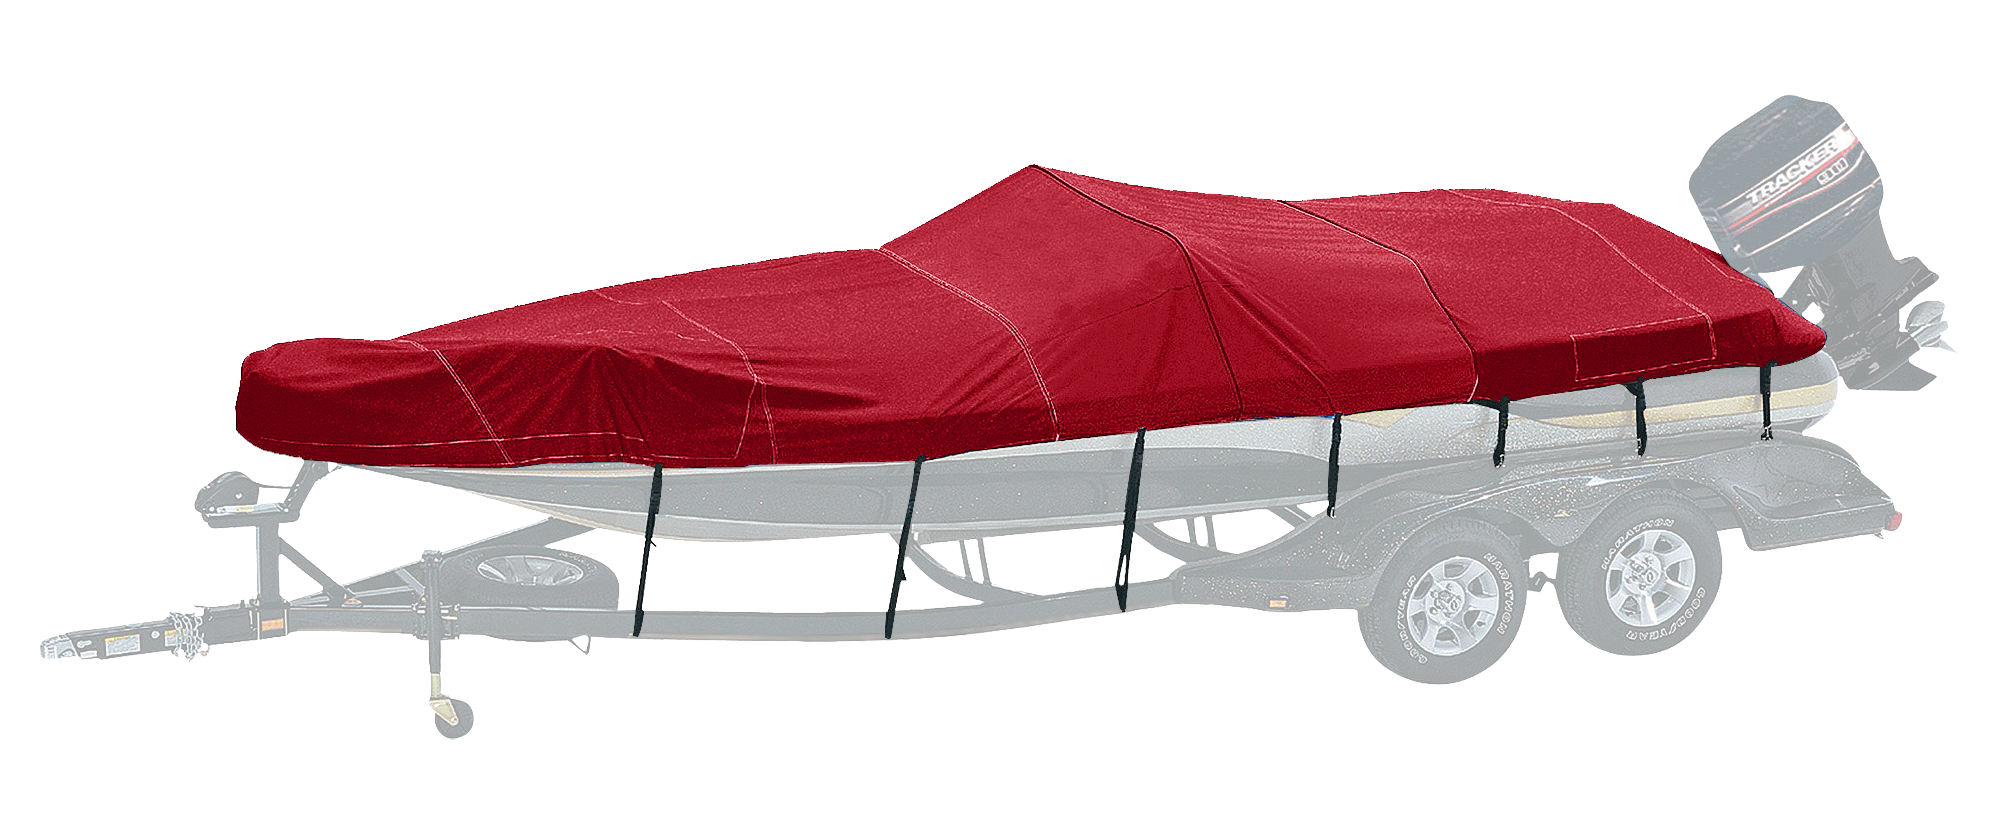 Bass Pro Shops Exact Fit Boat Cover by Westland - Tahoe Boats - 2002-2004 204 Deckboat I/O - Burgundy